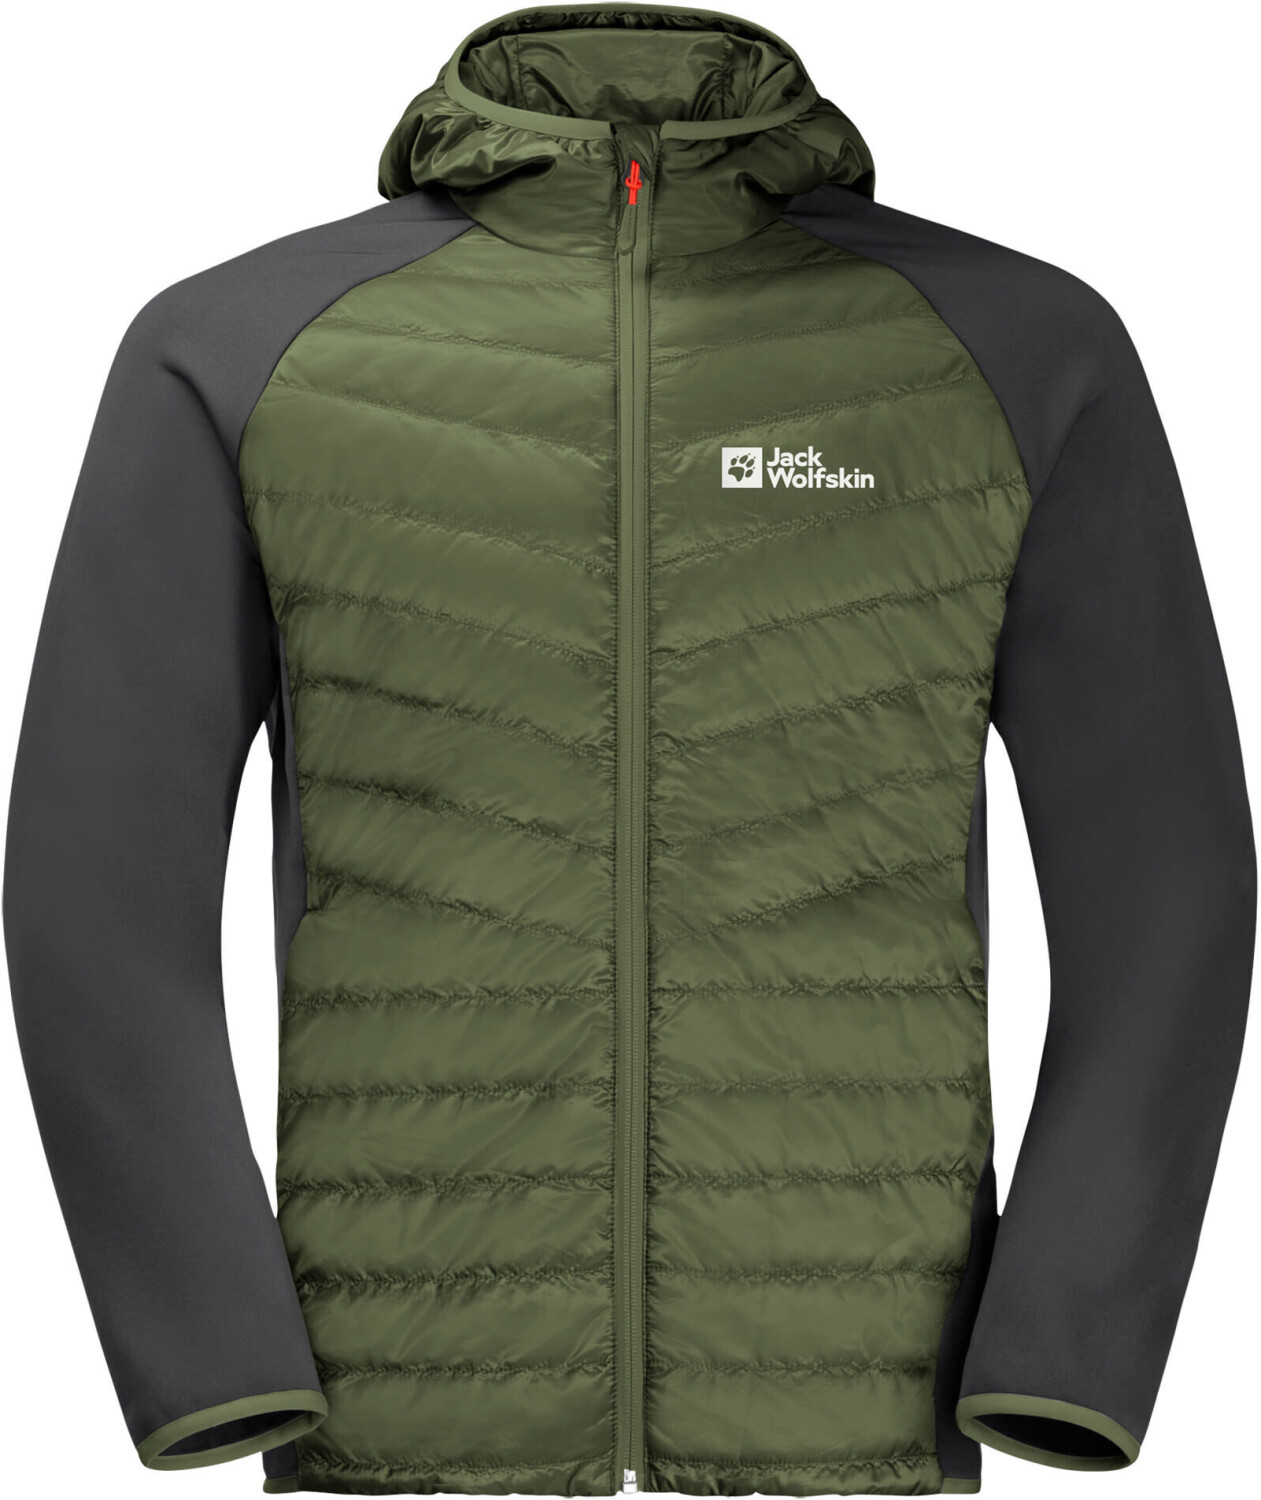 Buy Jack Wolfskin Deals – Hybrid (Today) Pro £60.00 from Best M Routeburn on